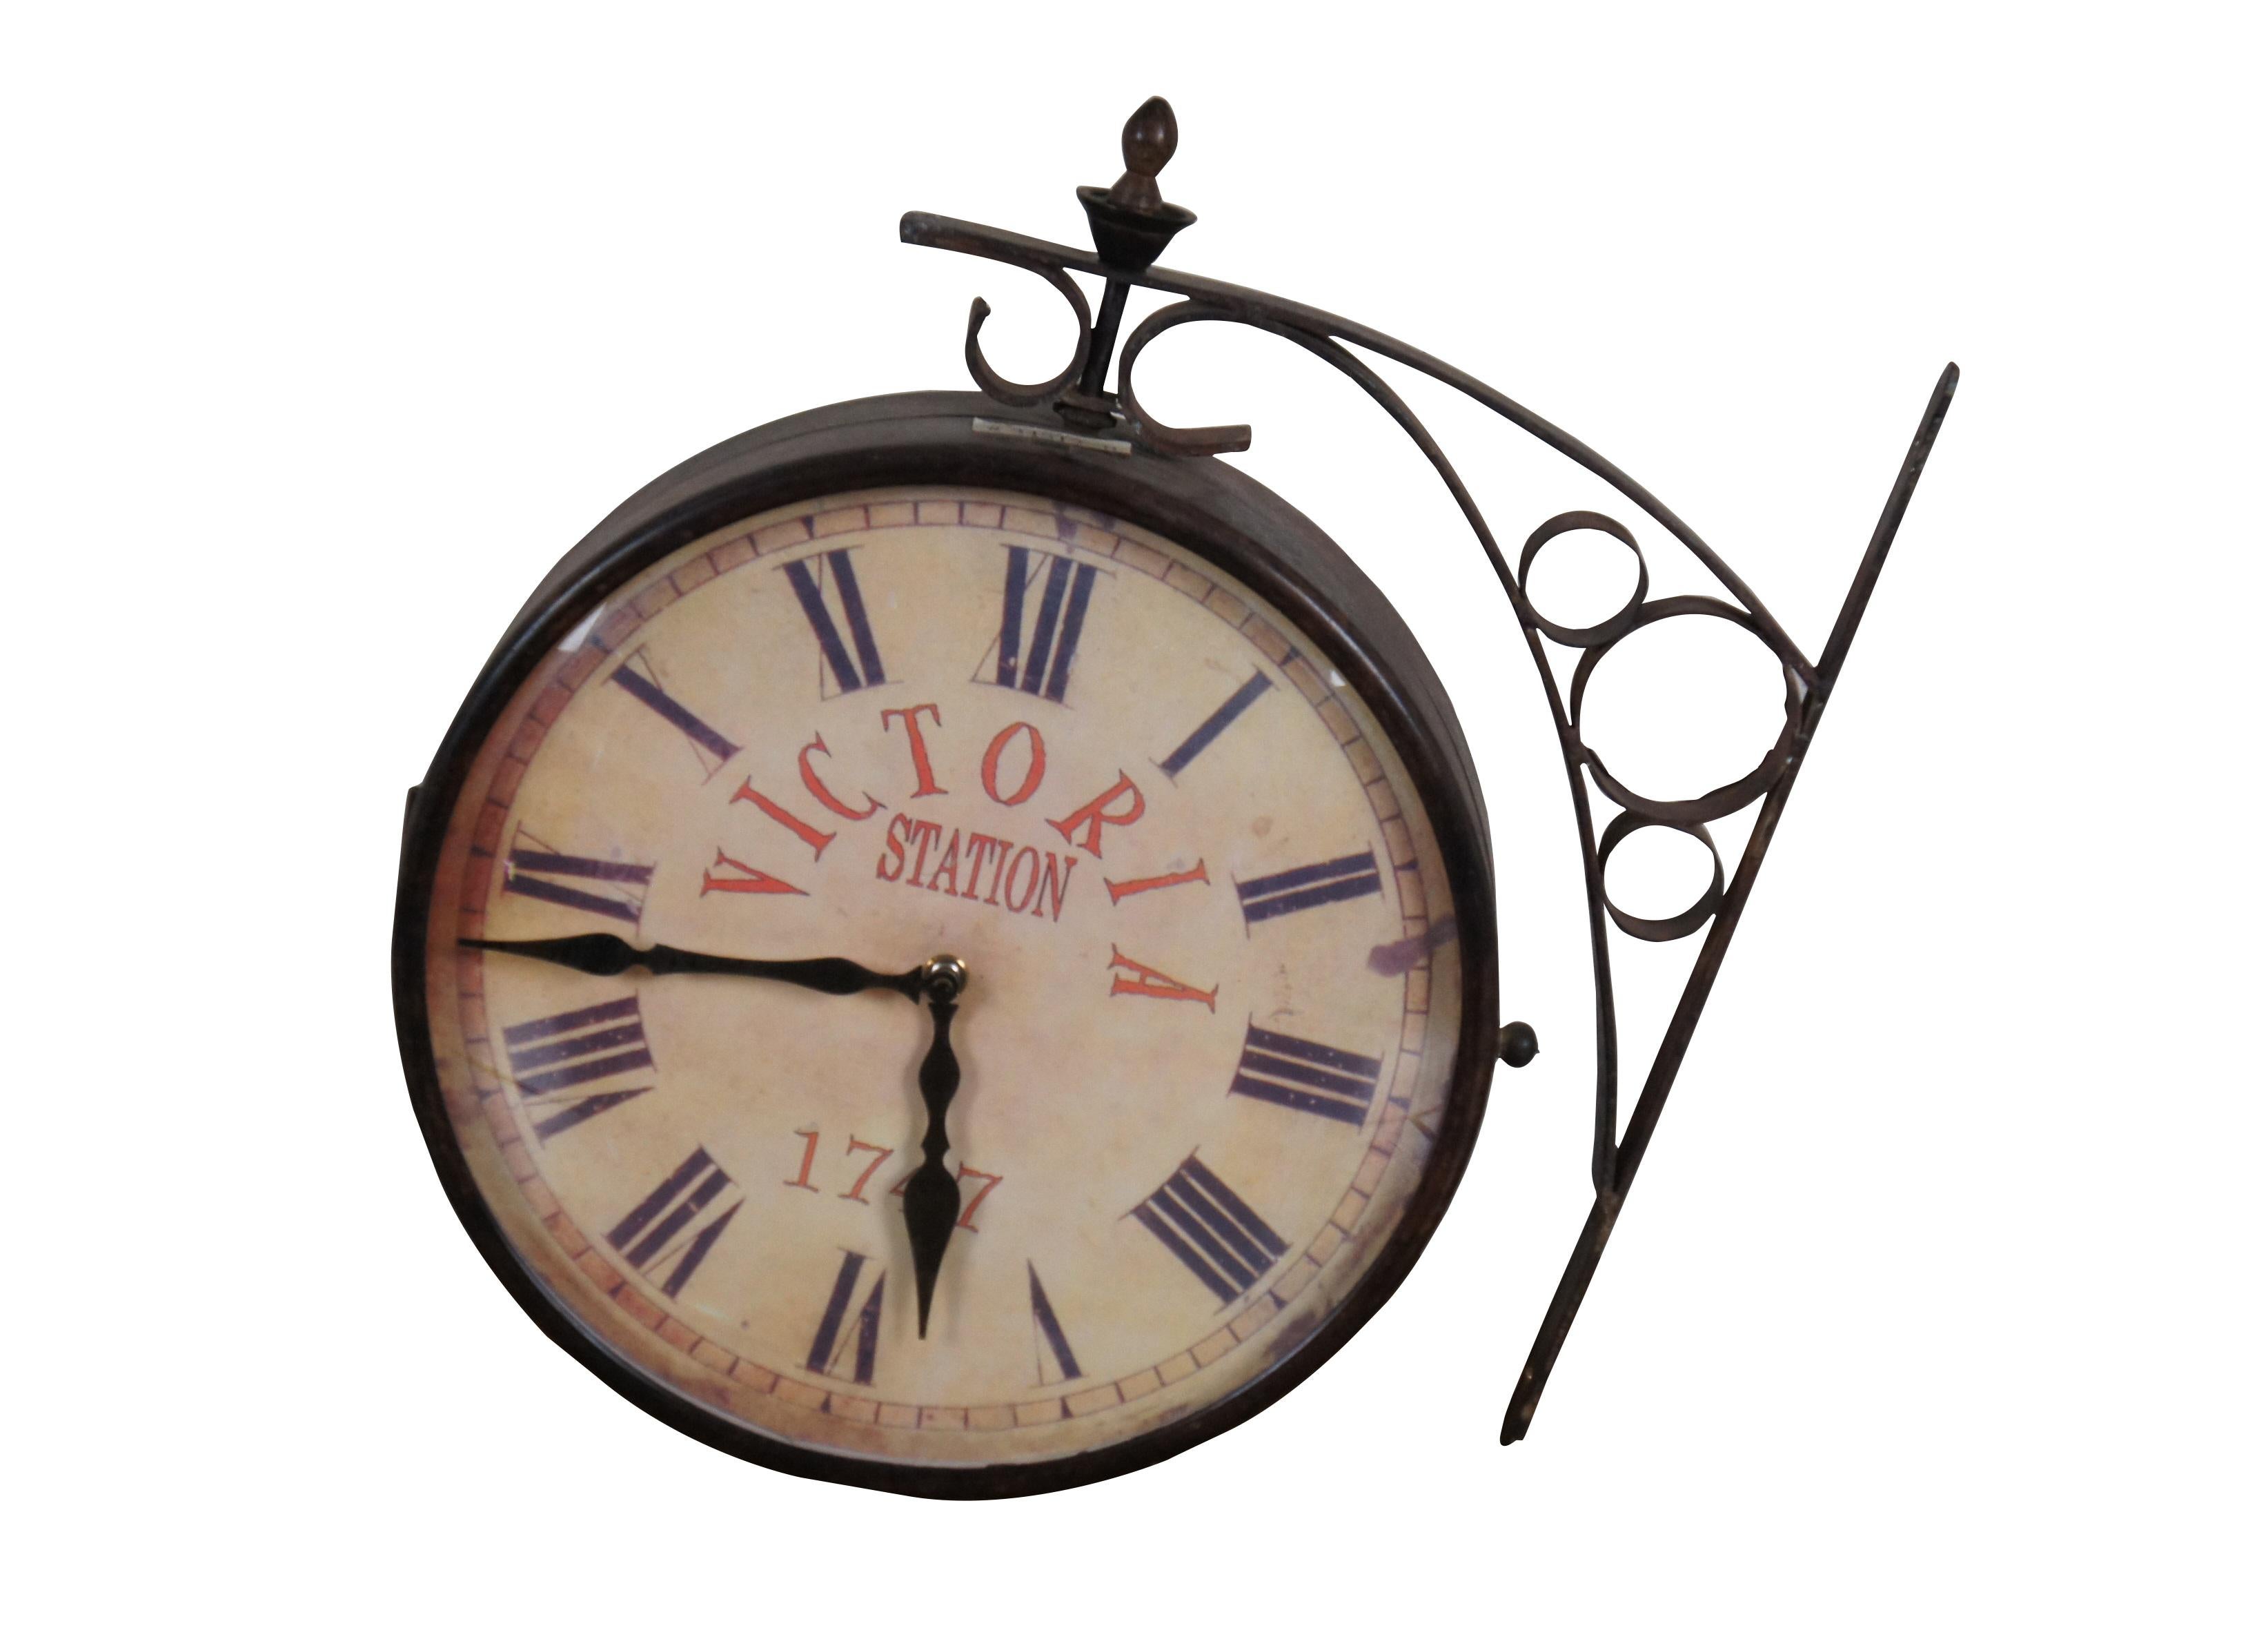 Late 20th century double sided railway clock styled after the famous clock at Victoria Station, London. Wrought metal wall mounted support and case in a dark bronze finish. 12 inch diameter printed face with faux distressing, Roman numerals, and the